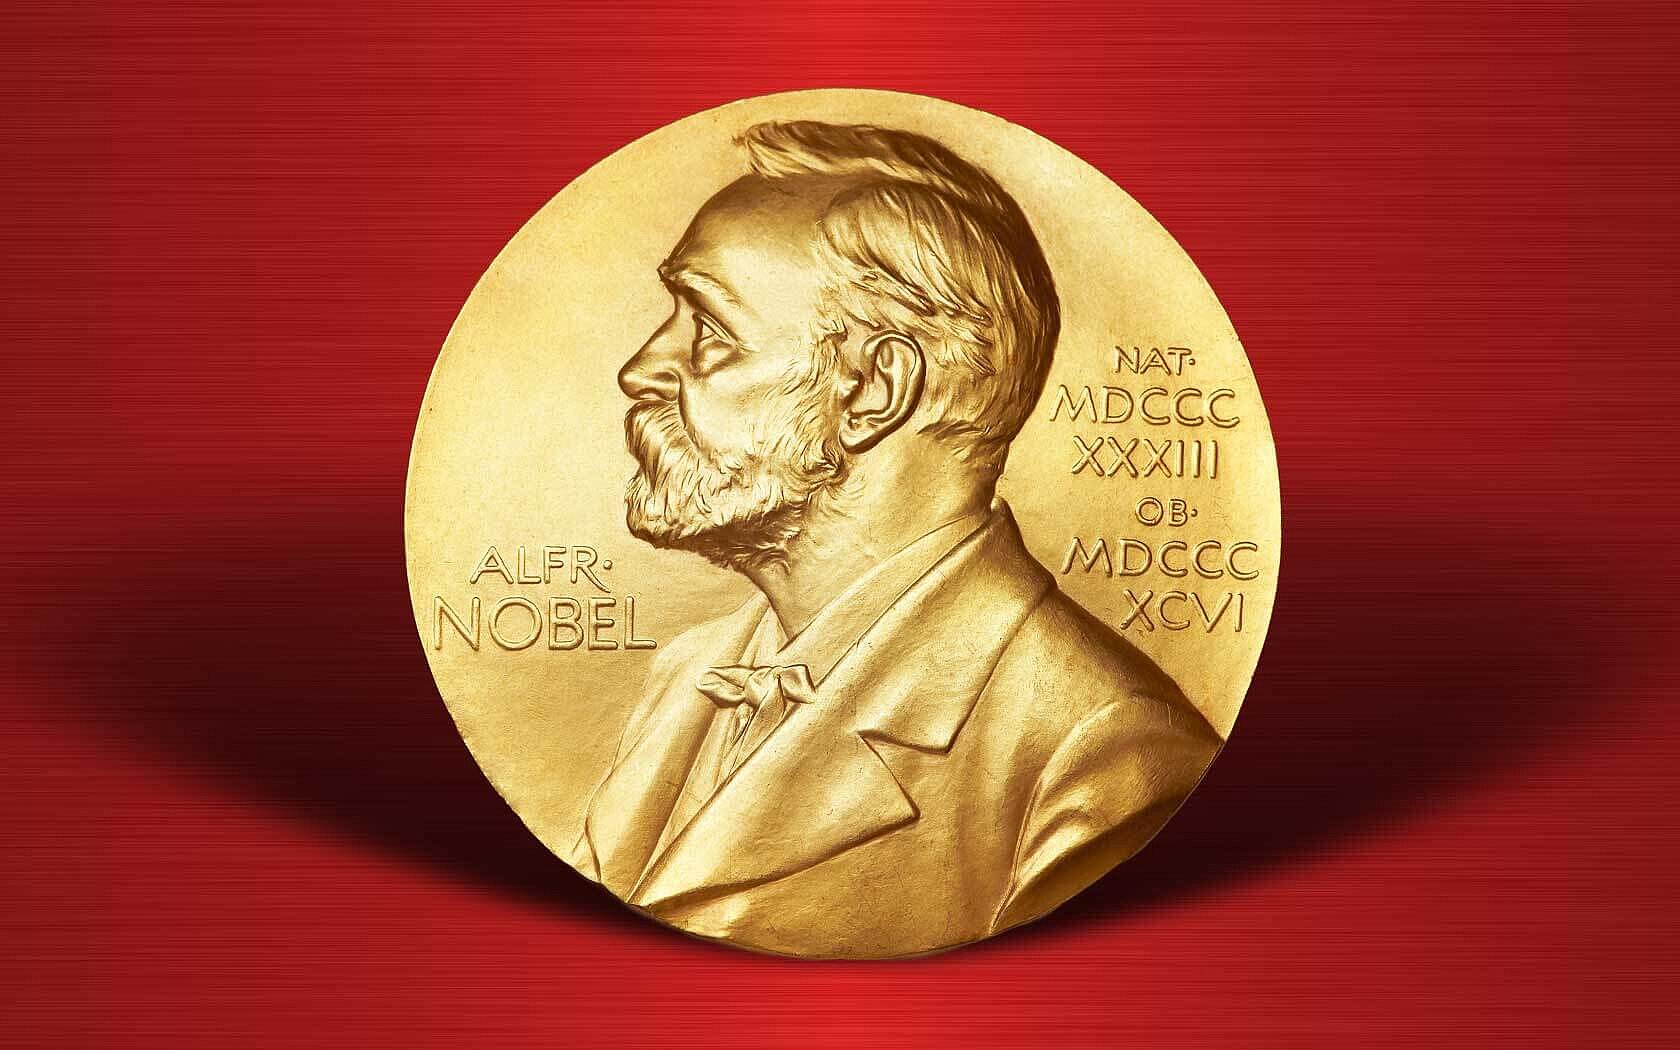 The Ministry of Foreign Affairs of Ukraine has voiced its opposition to inviting the ambassadors of Russia and Belarus to the Nobel Prize ceremony